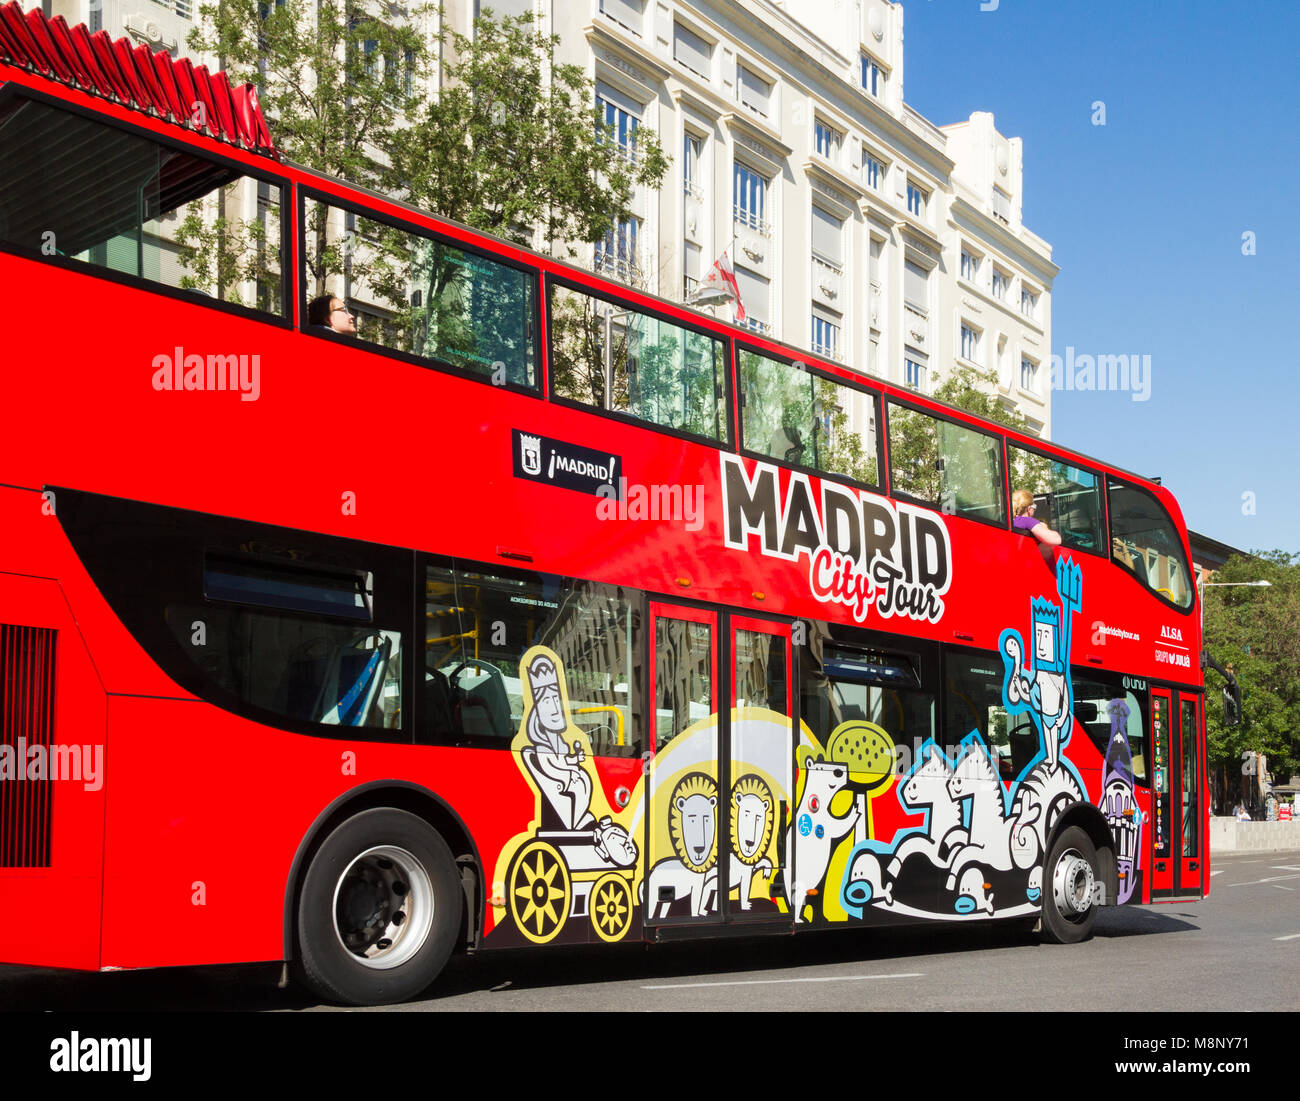 City sightseeing tour bus in Madrid, Spain Stock Photo